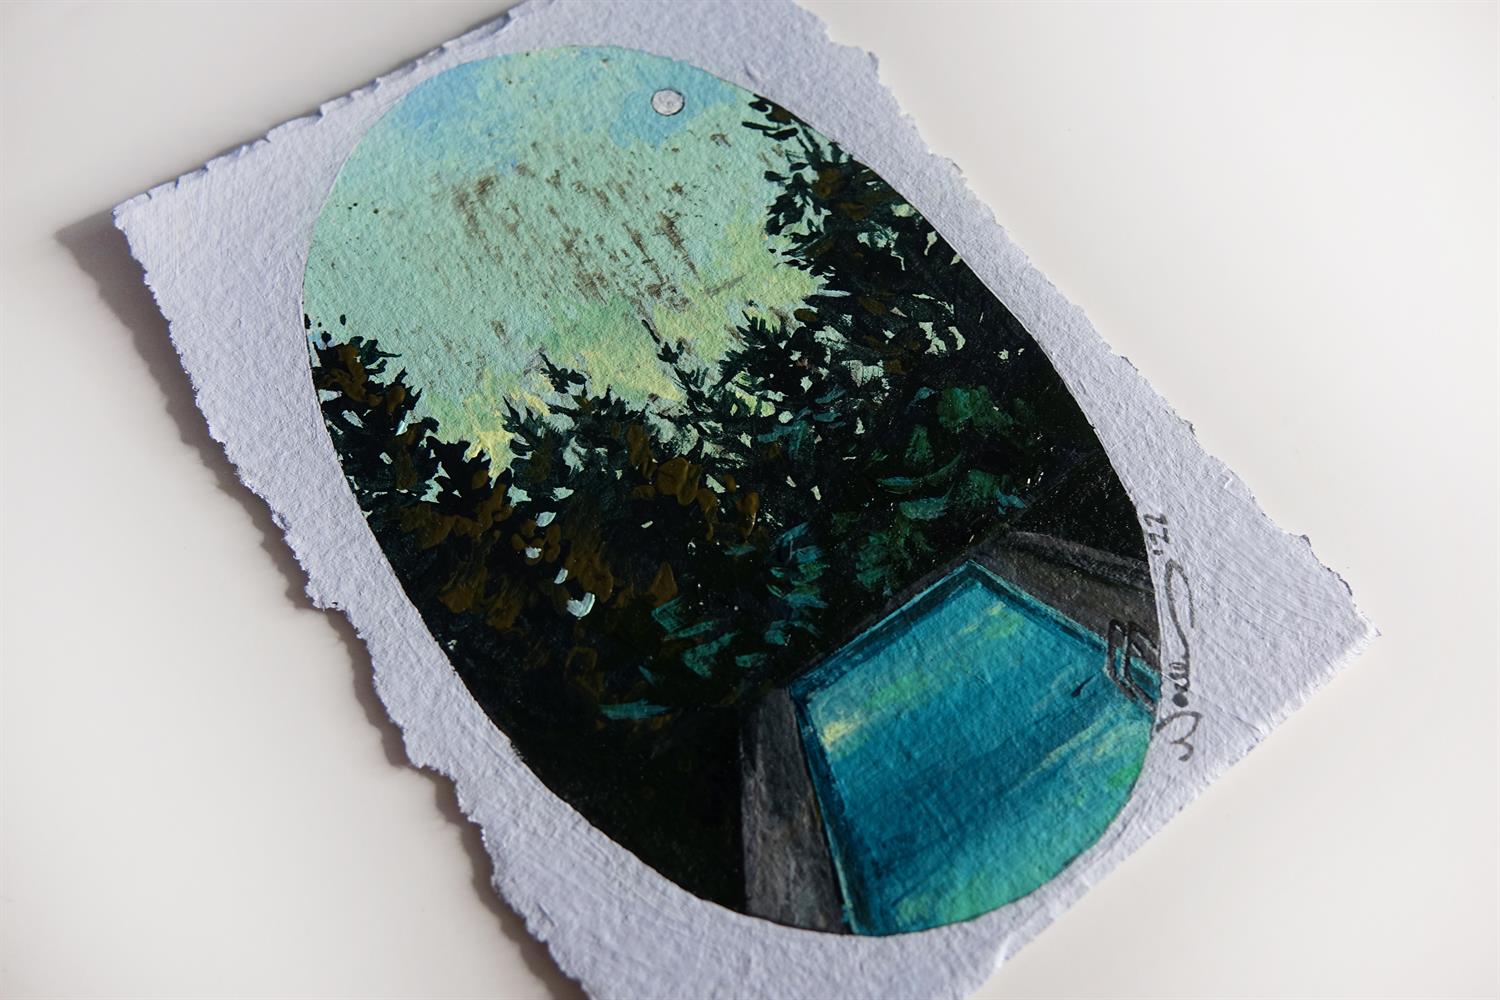 Noelle Phares, Green-Washed Boughs, 2022 - Image 3 of 3